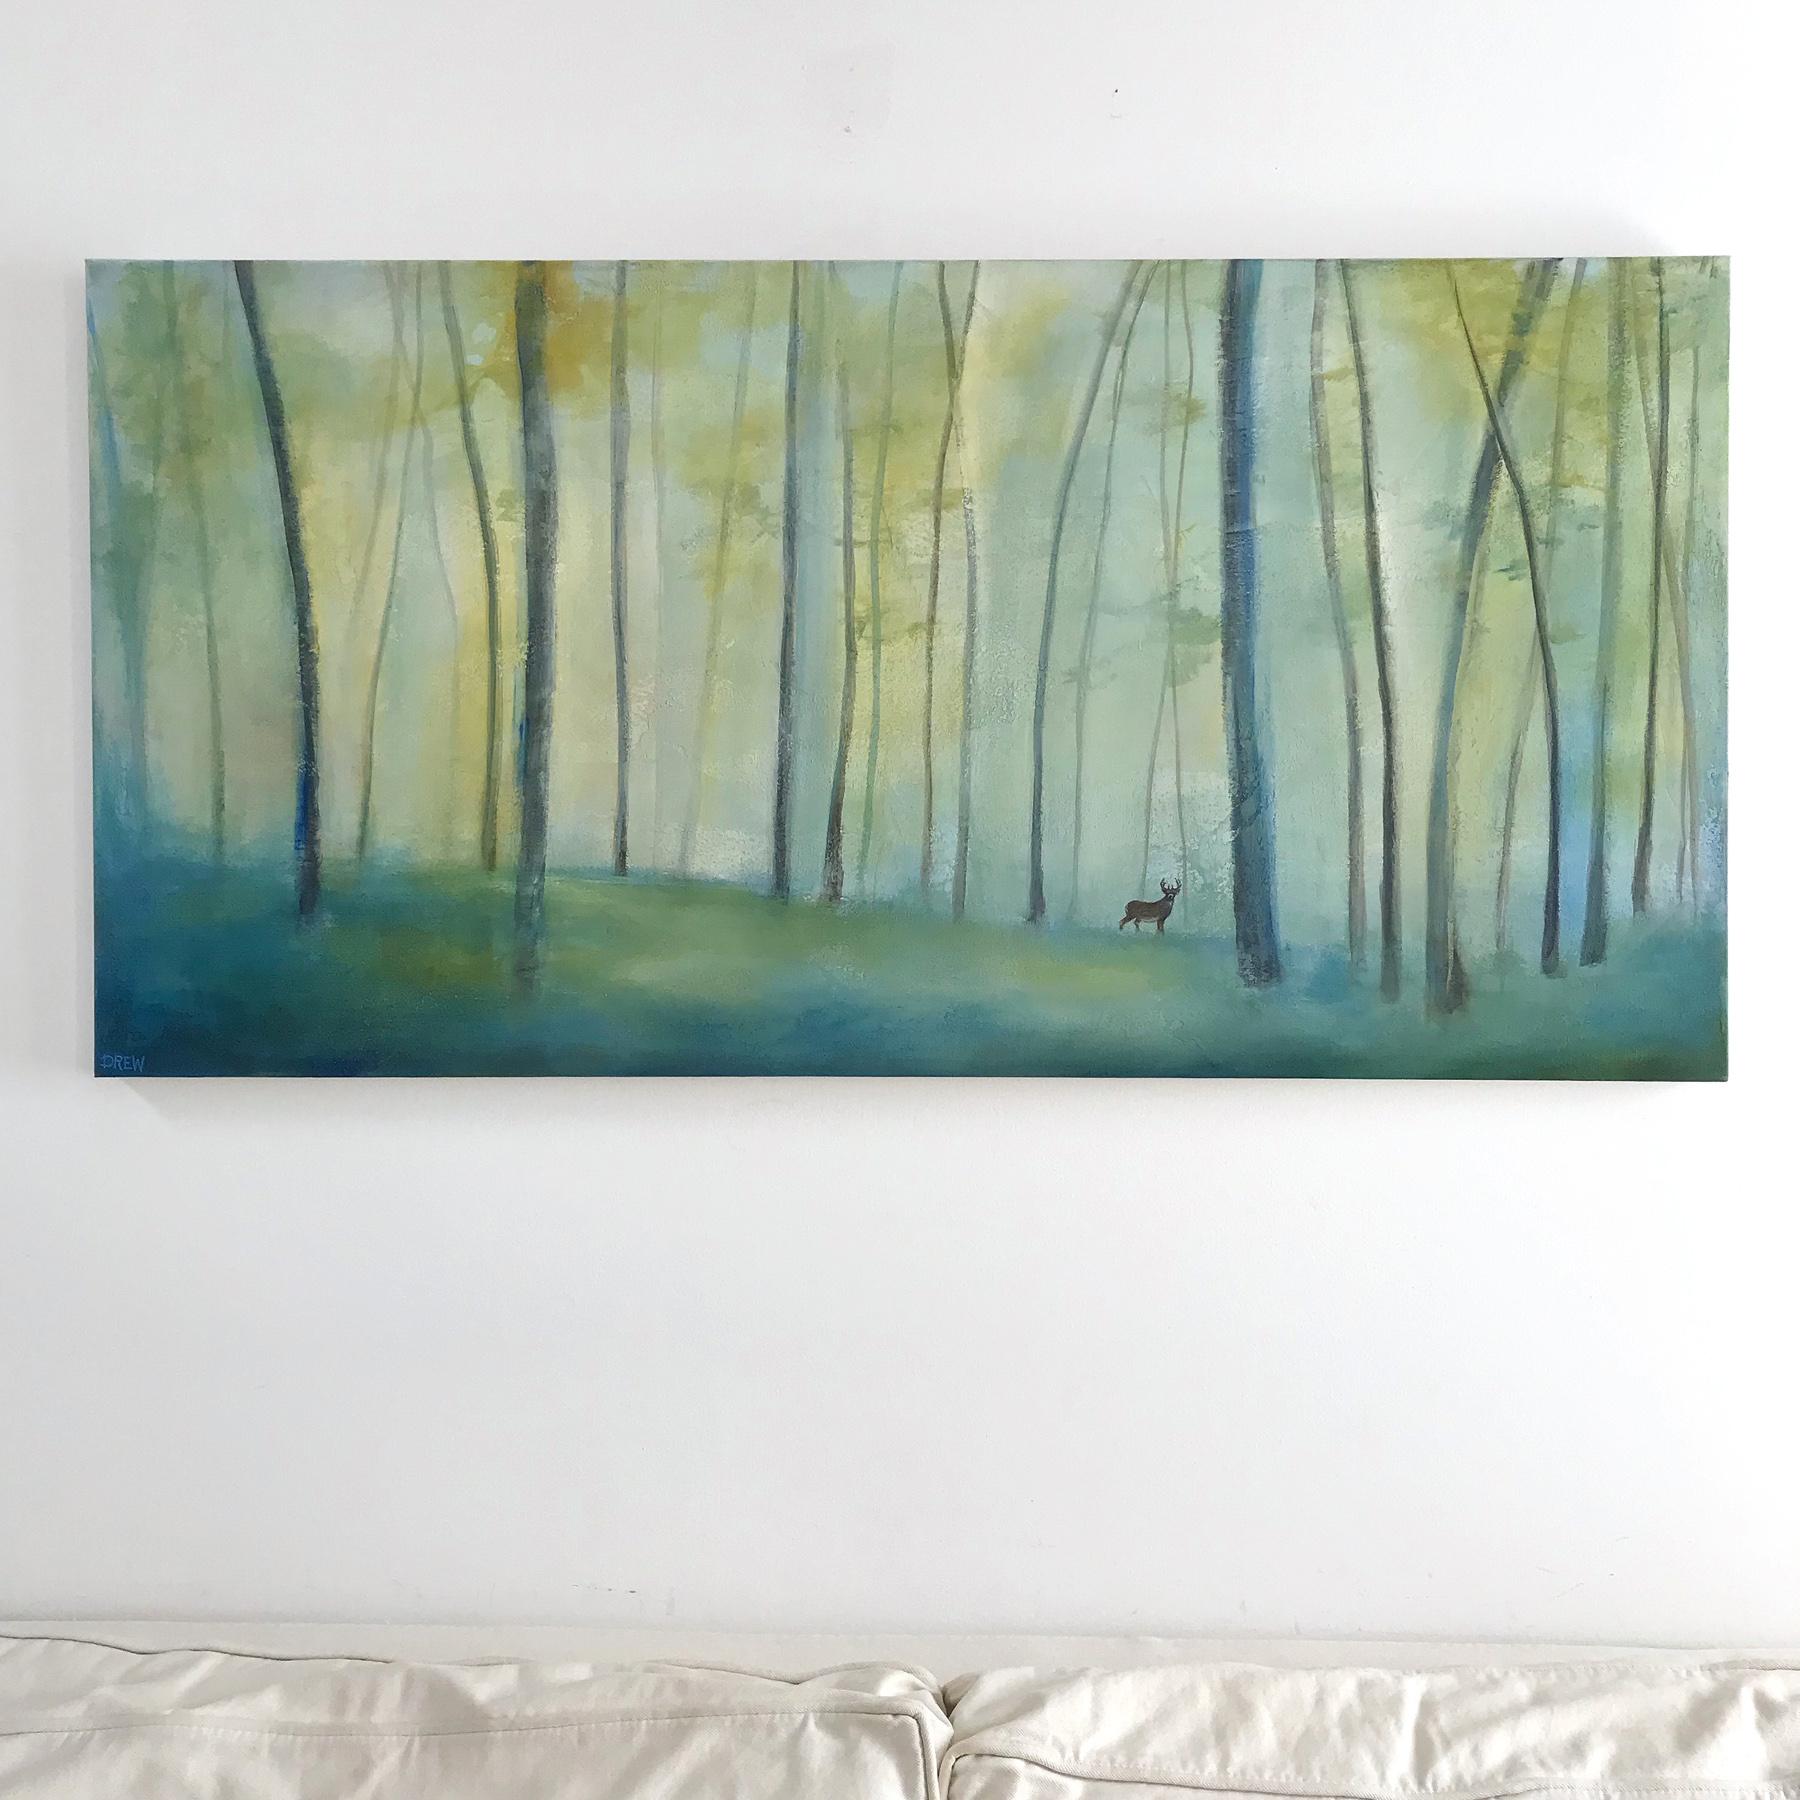 <p>Artist Comments<br />And into the forest I go, to lose my mind and find my soul.</p><p>About the Artist<br />Growing up in Rochester, Michigan, Drew Noel Marin was surrounded by artists and creativity was always encouraged. This artistic